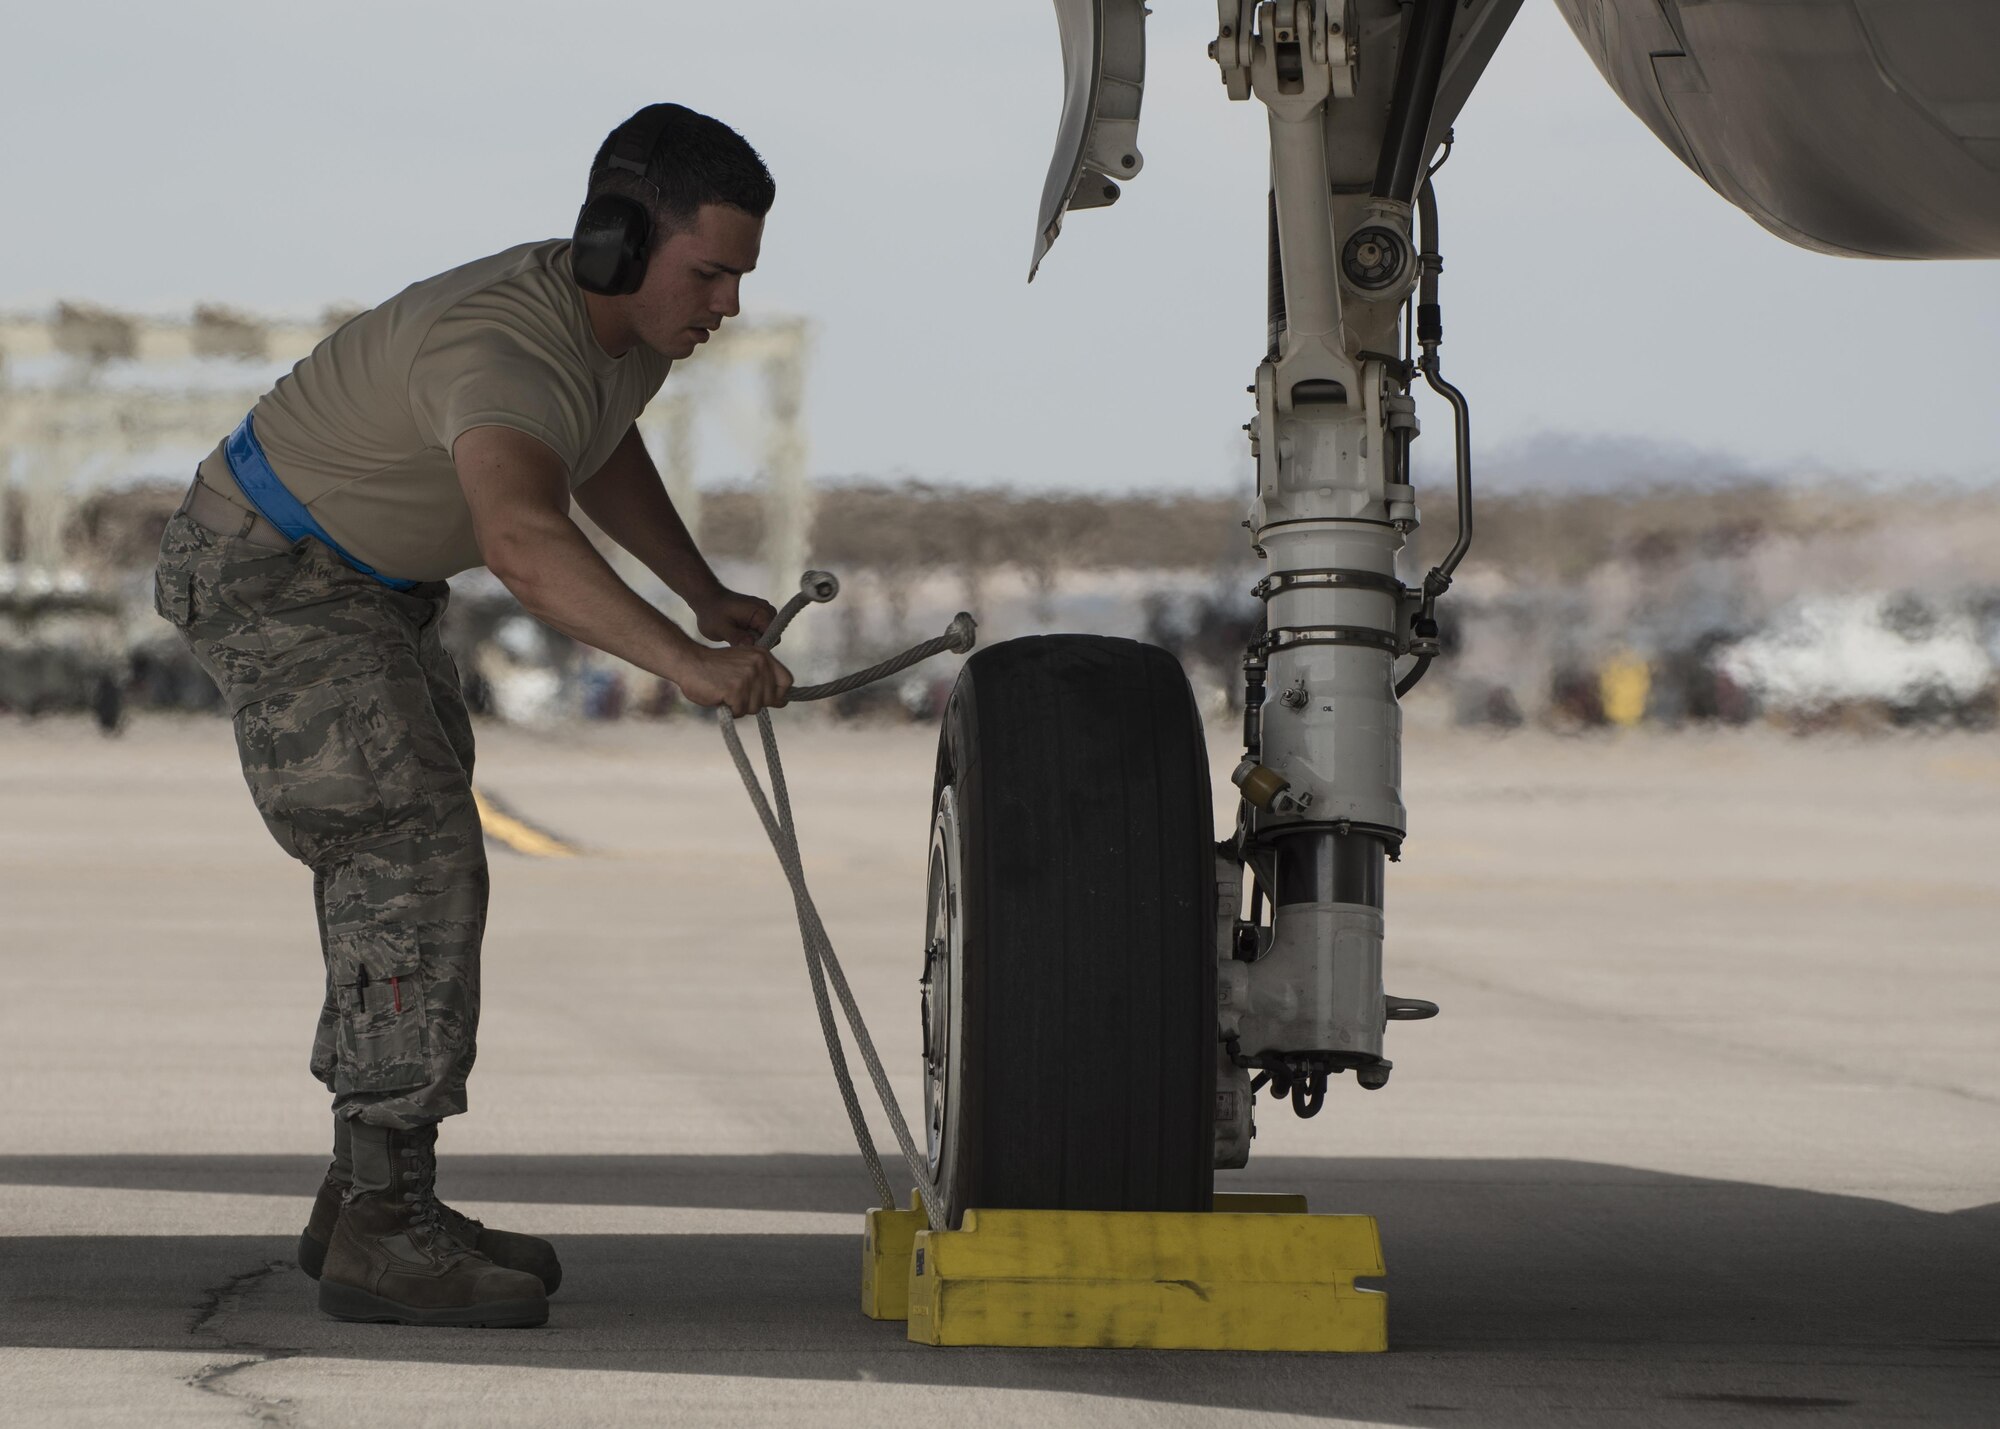 Staff Sgt. Marcos Cruz La Santa, 33rd Aircraft Maintenance Squadron avionics systems technician, pulls chocks from beneath an F-35A Lightning II July 18, 2017, at Nellis Air Force Base, Nev. Cruz is one of the first core F-35 trained maintainers in the Air Force to become a noncommissioned officer. (U.S. Air Force photo by Staff Sgt. Peter Thompson)